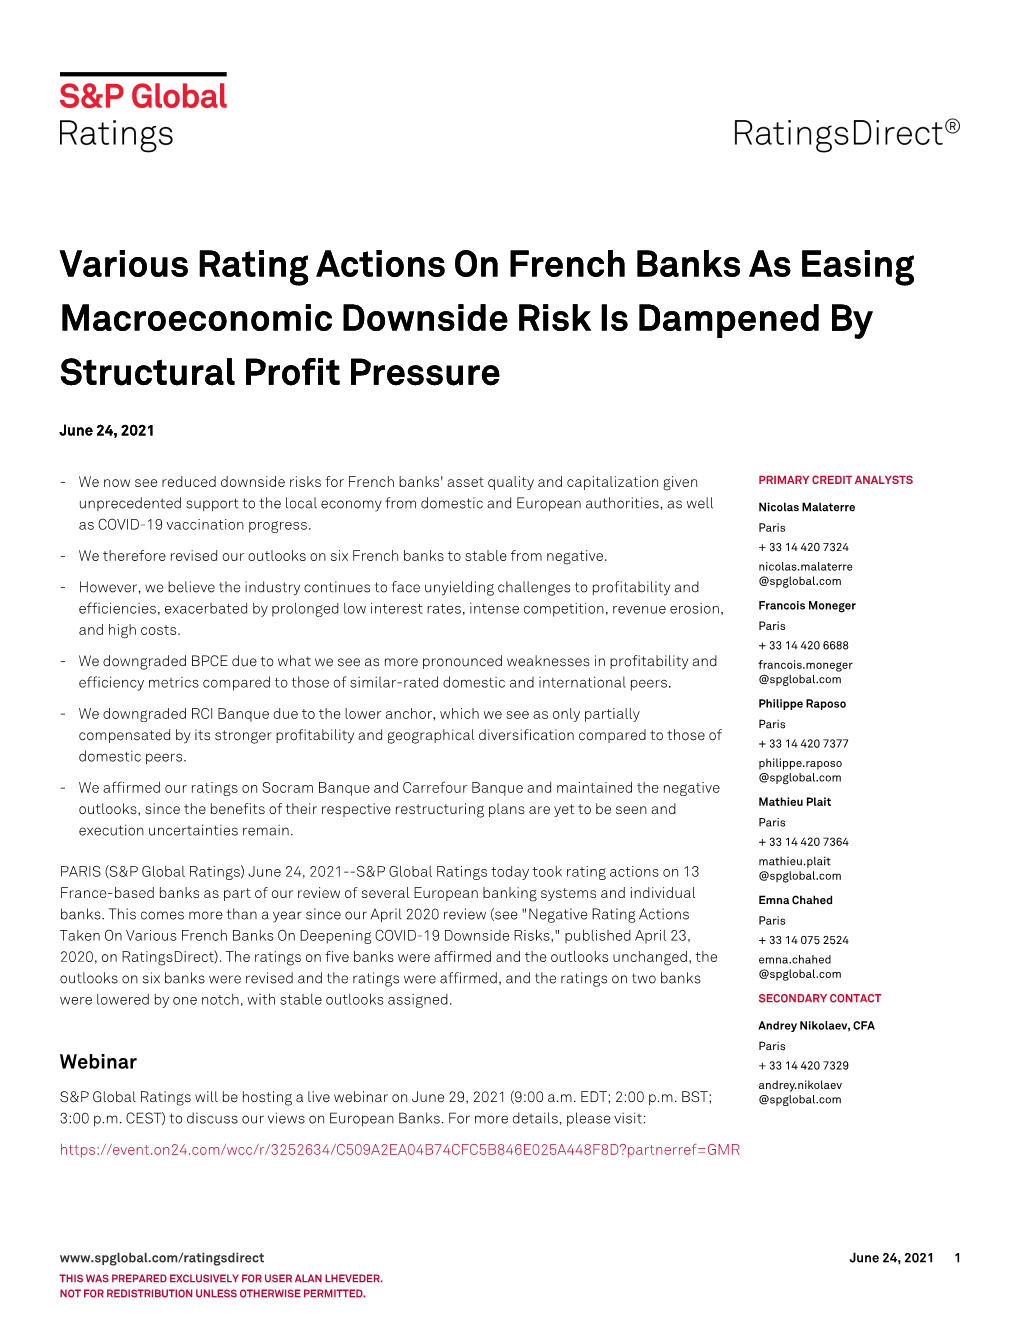 Various Rating Actions on French Banks As Easing Macroeconomic Downside Risk Is Dampened by Structural Profit Pressure